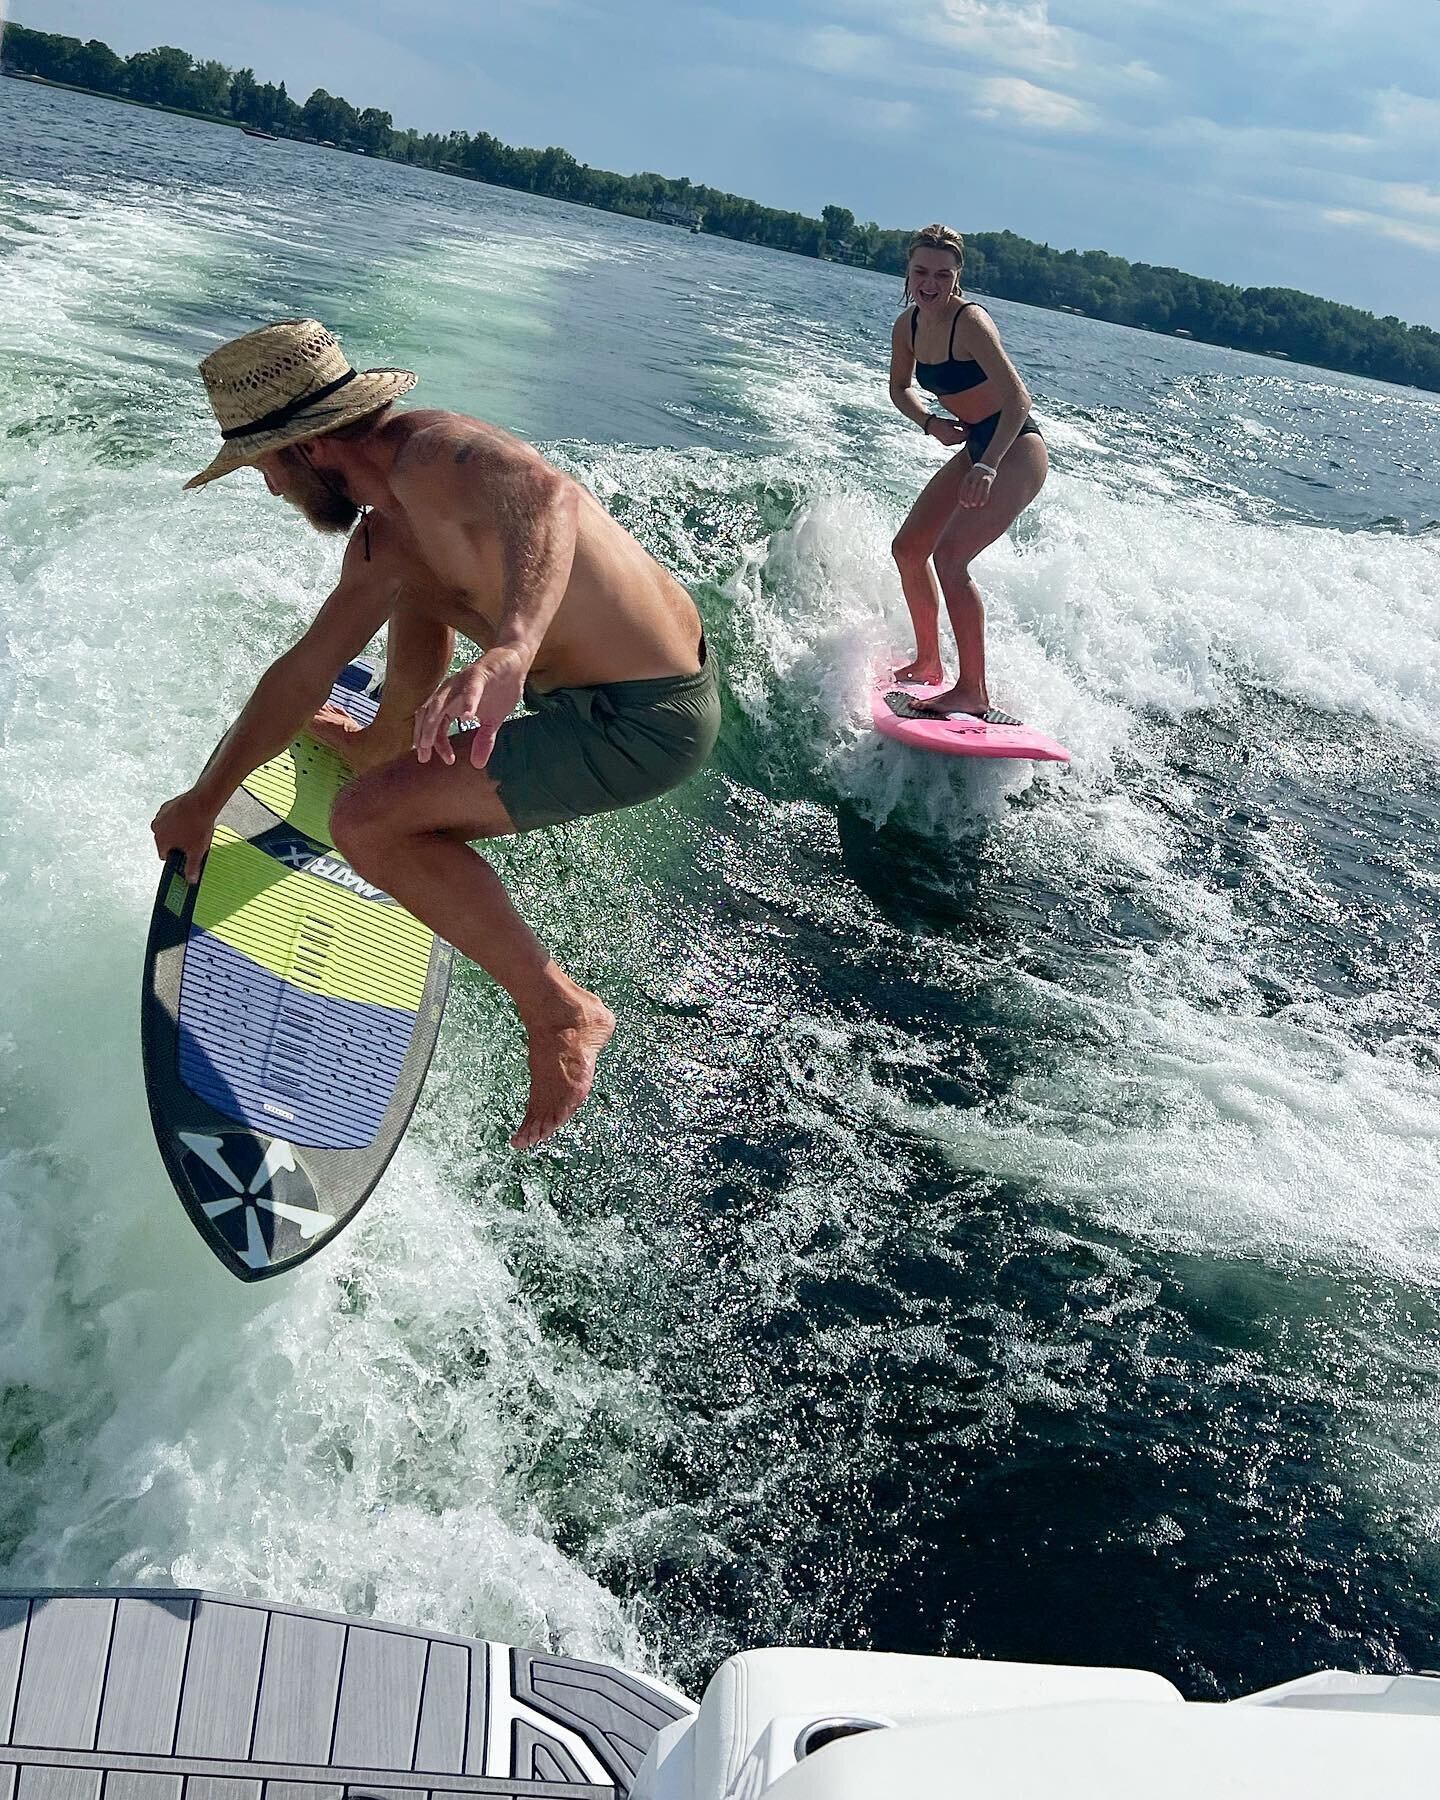 Ya&rsquo;ll ready jump into summer!!?? 
We sure are!  Please get signed up for some boat or foil time soon, I don&rsquo;t wanna miss ya this summer!
Sign up online at hangloosemn.com
Call or text anytime (320)852-7575
Or stop into the shop at Lake Ca